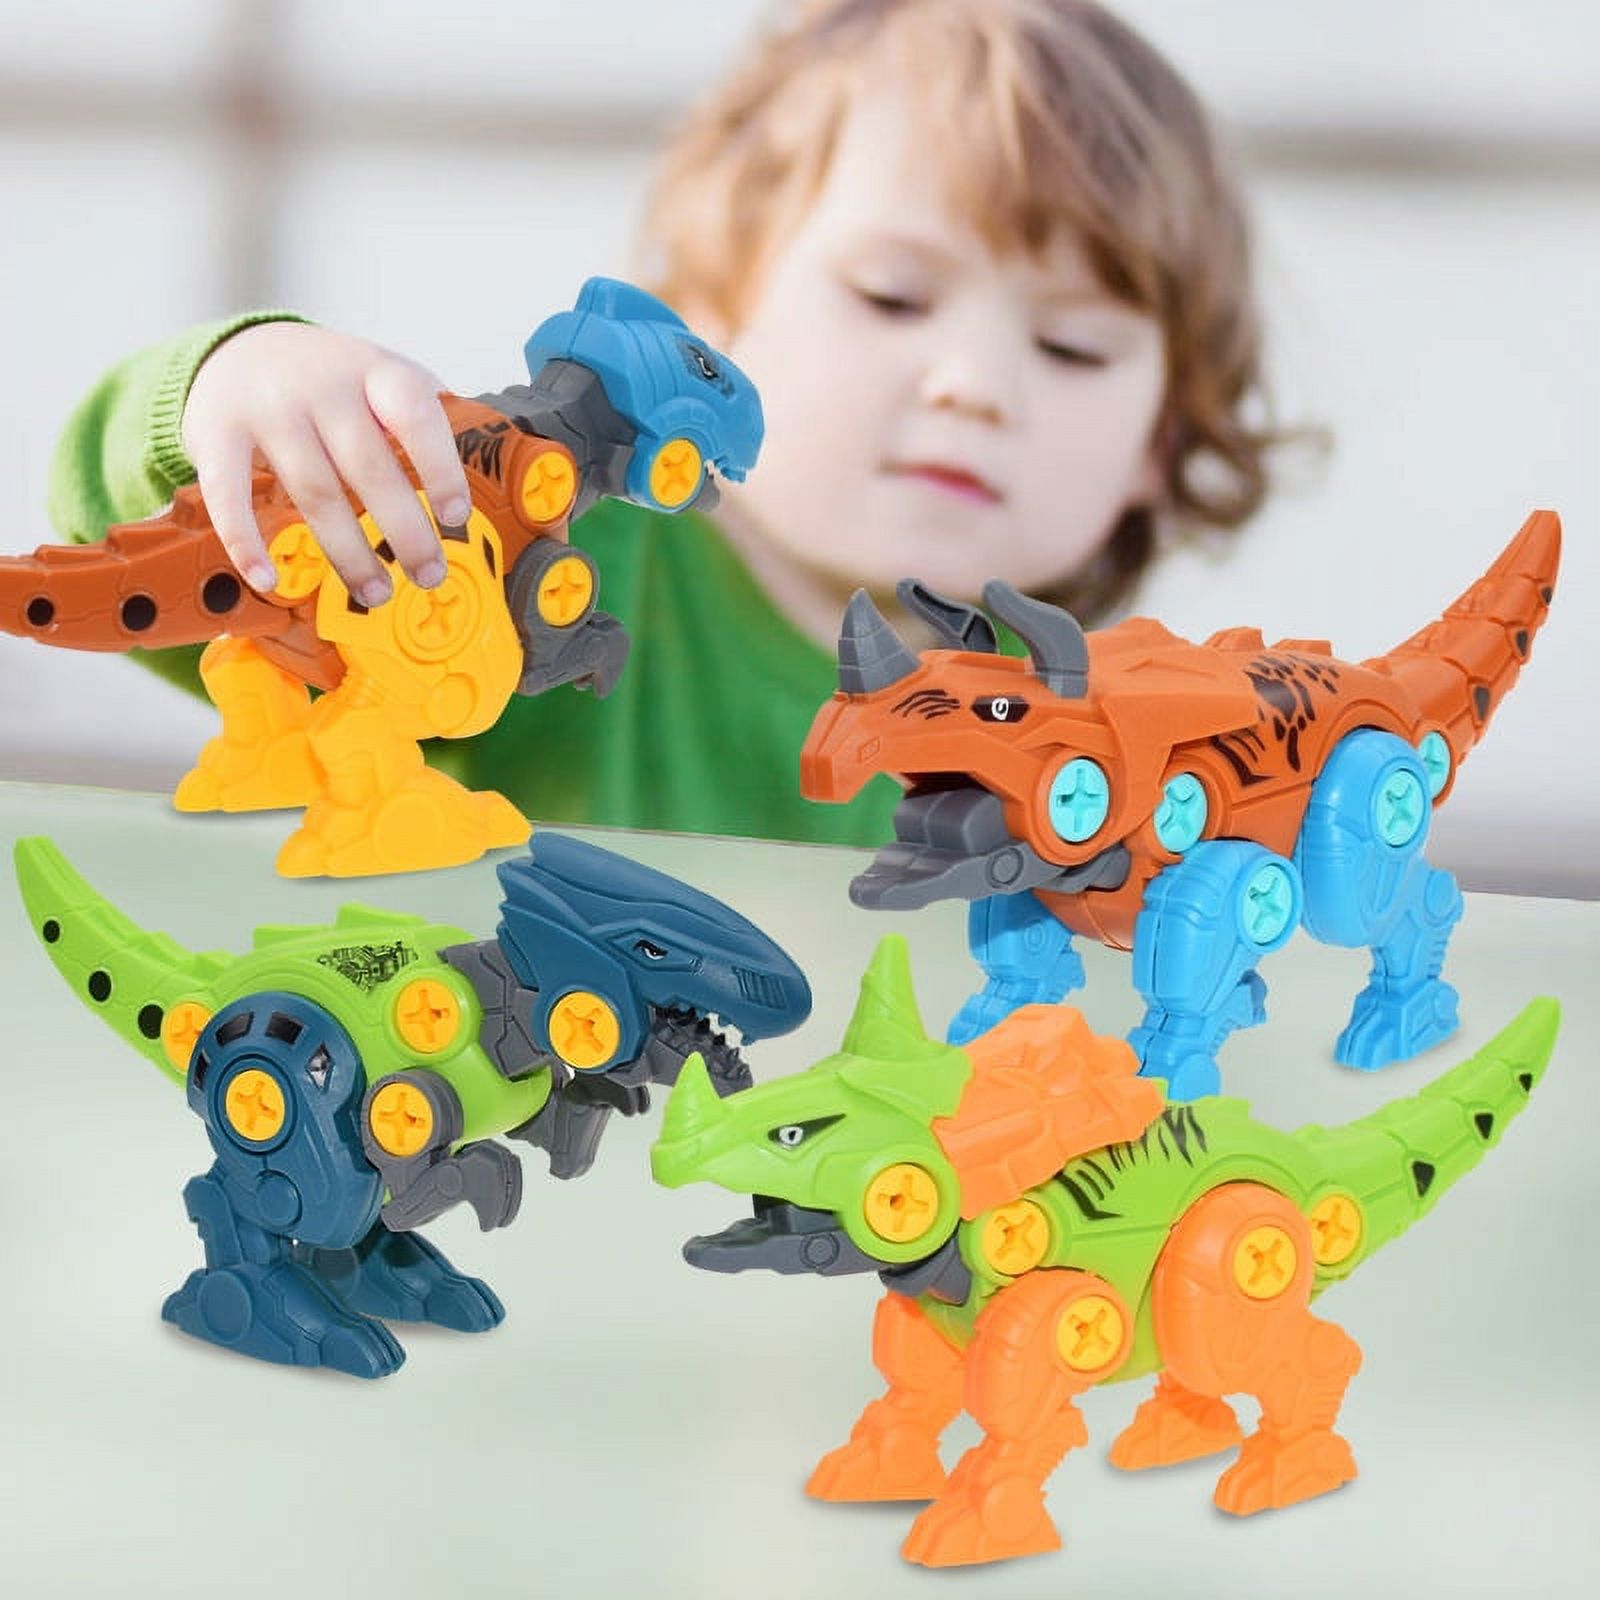 Amerteer Dinosaur 2Pcs STEM Toys, Take Apart Fun Construction Engineering Building Toys Sets Blocks Colorful Dino Easter Egg Decorator for Boys Girls Toddle Best Toy Gift Kids Ages 3+ Year Old - image 2 of 8